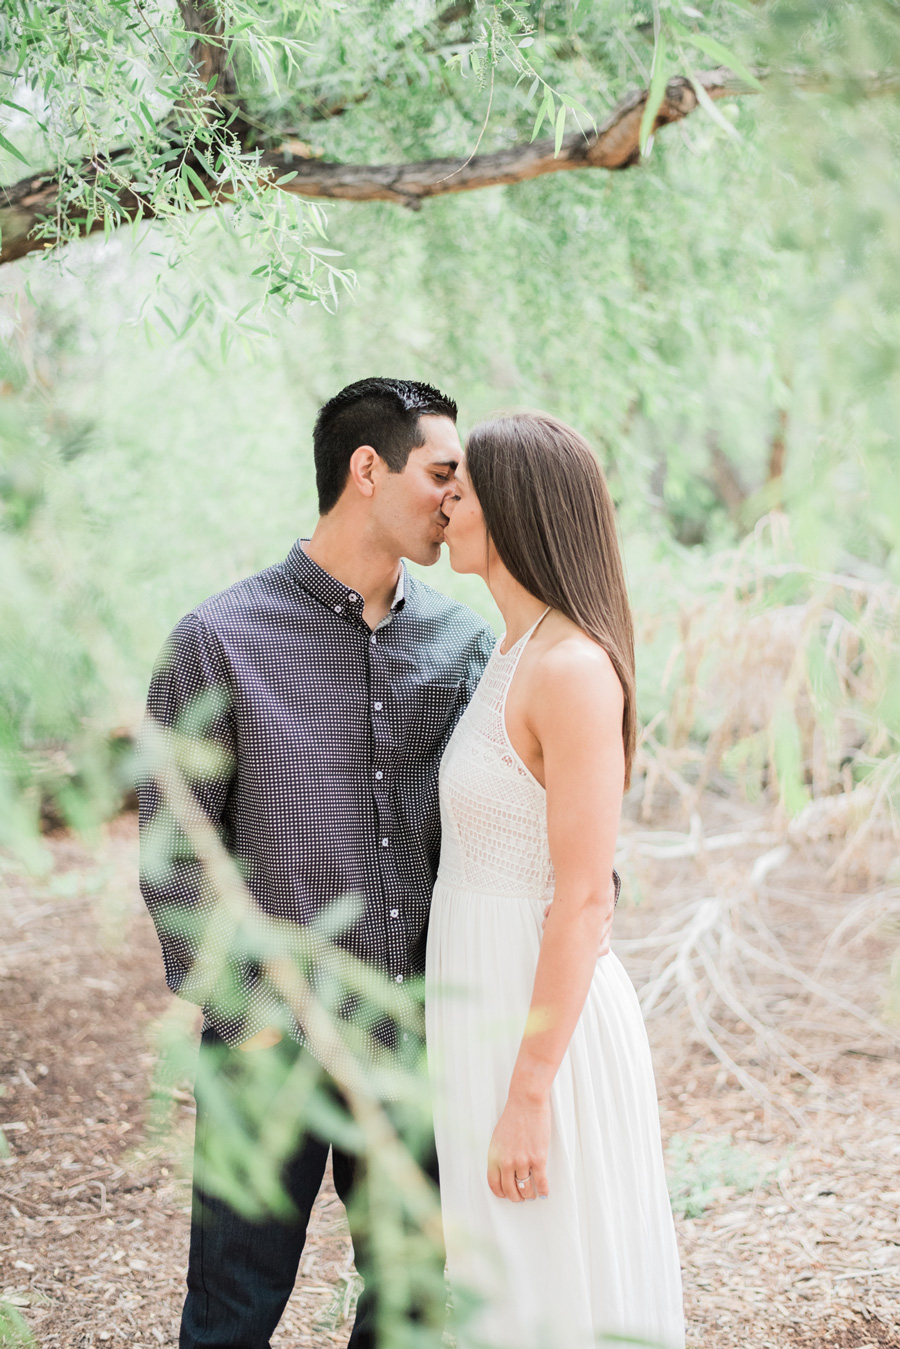 C Ward Photography captures a sweet moment